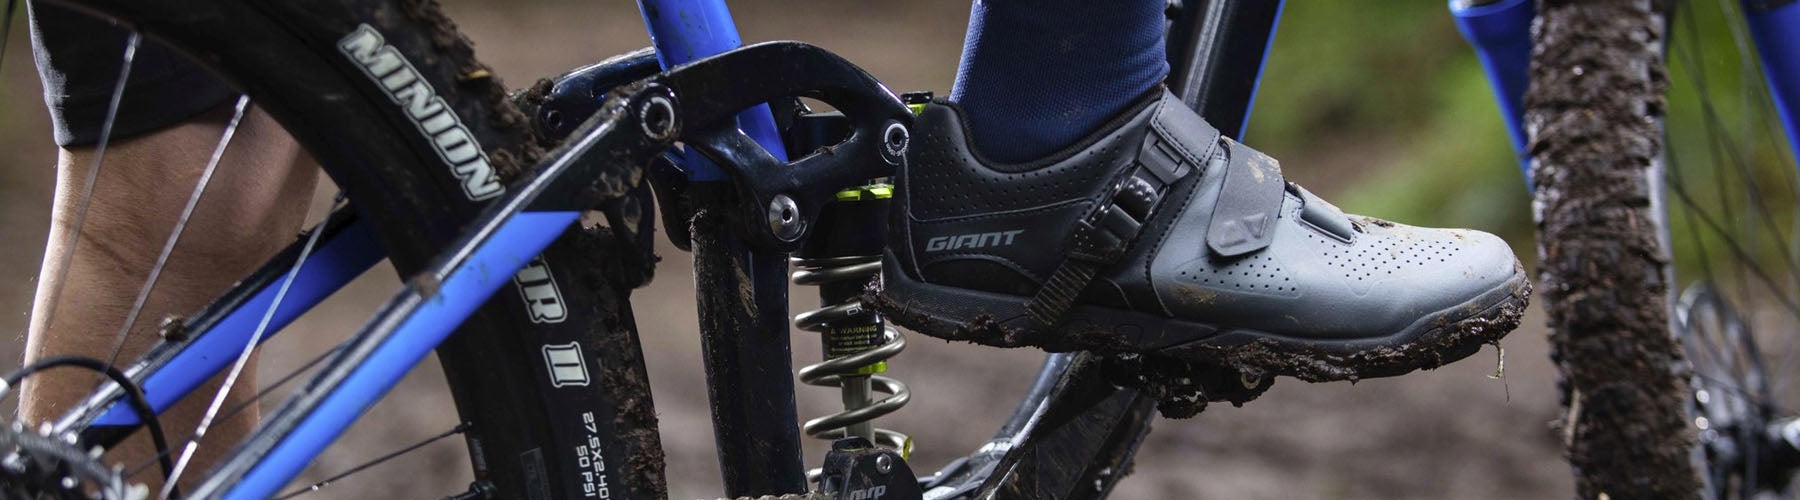 Bike Shoes, Road Cycling and Mountain Biking clipless and platform